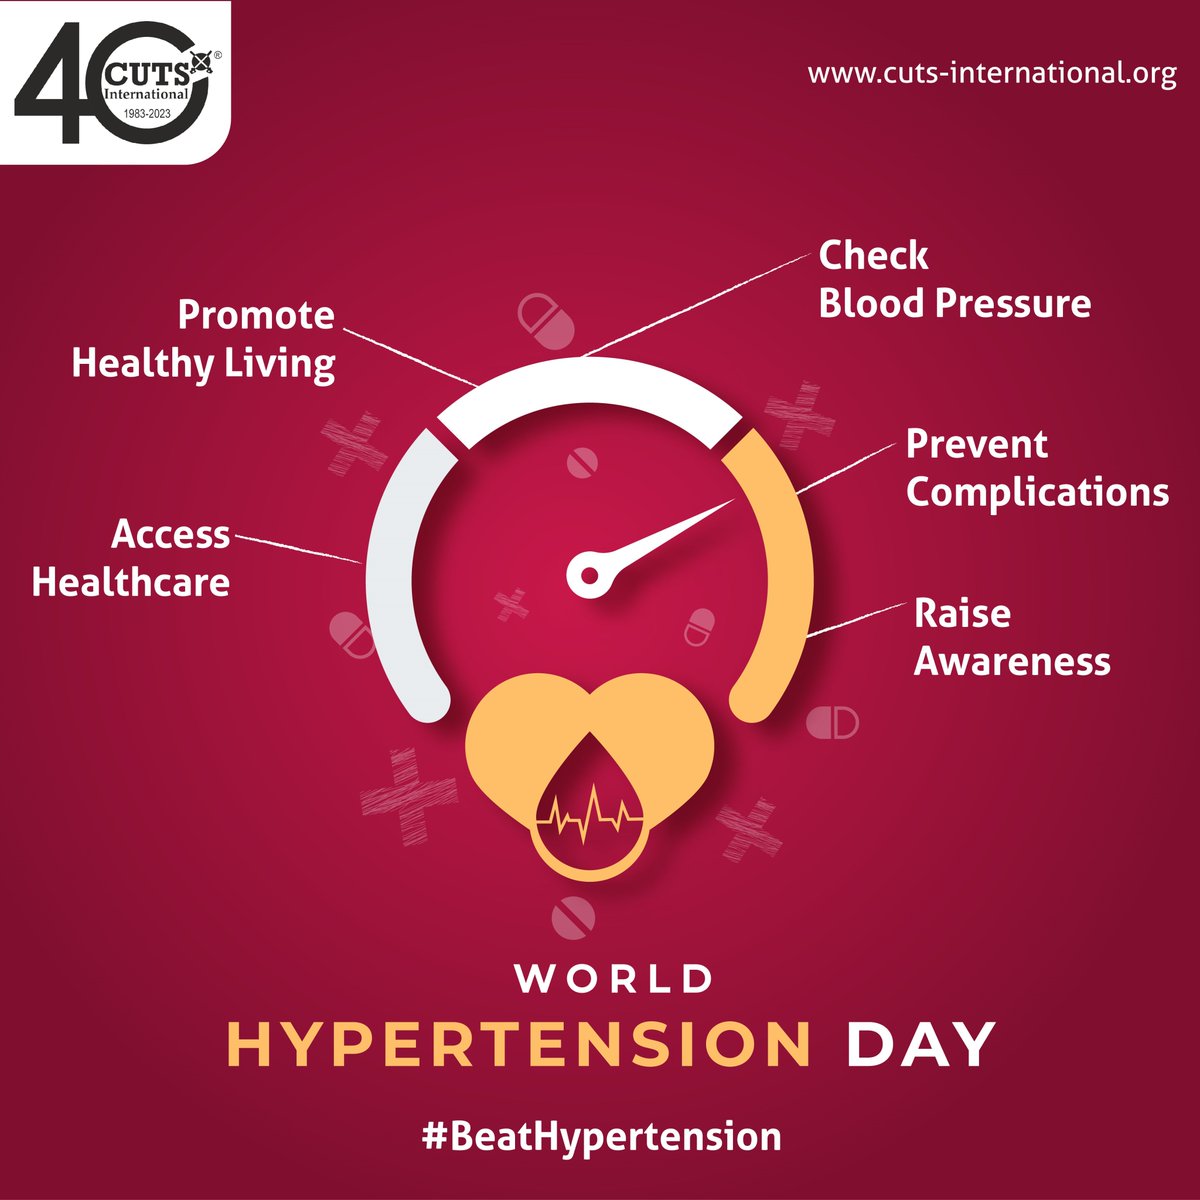 Join the fight against hypertension! 🌍💙 Remember to monitor, manage, and maintain your heart health.
#WorldHypertensionDay #HealthyHeart #BloodPressureAwareness #BeatHypertension #HeartHealth #LiveWell #PreventionIsKey

@psm_cuts